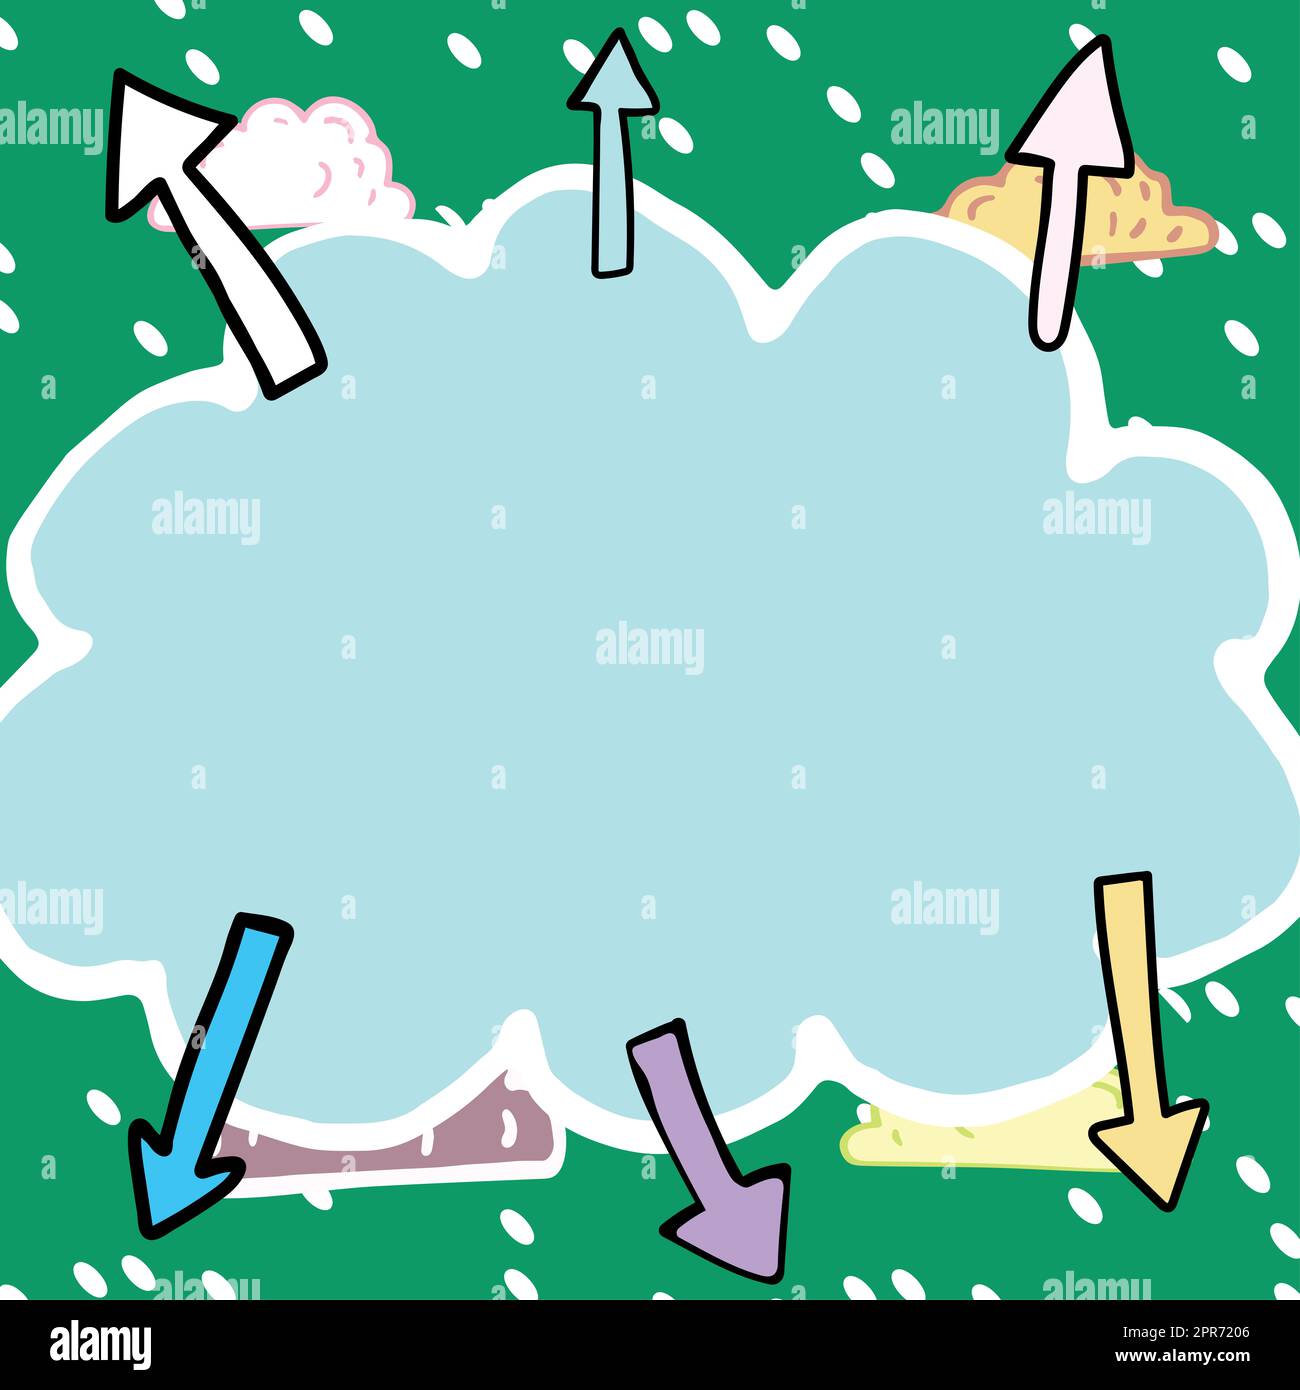 Important Messages Written In Shape Of Cloud With Arrows Around. Crutial Informations Presented In Cloudy Form With Snow In Background. Recent Ideas Diplayed. Stock Photo